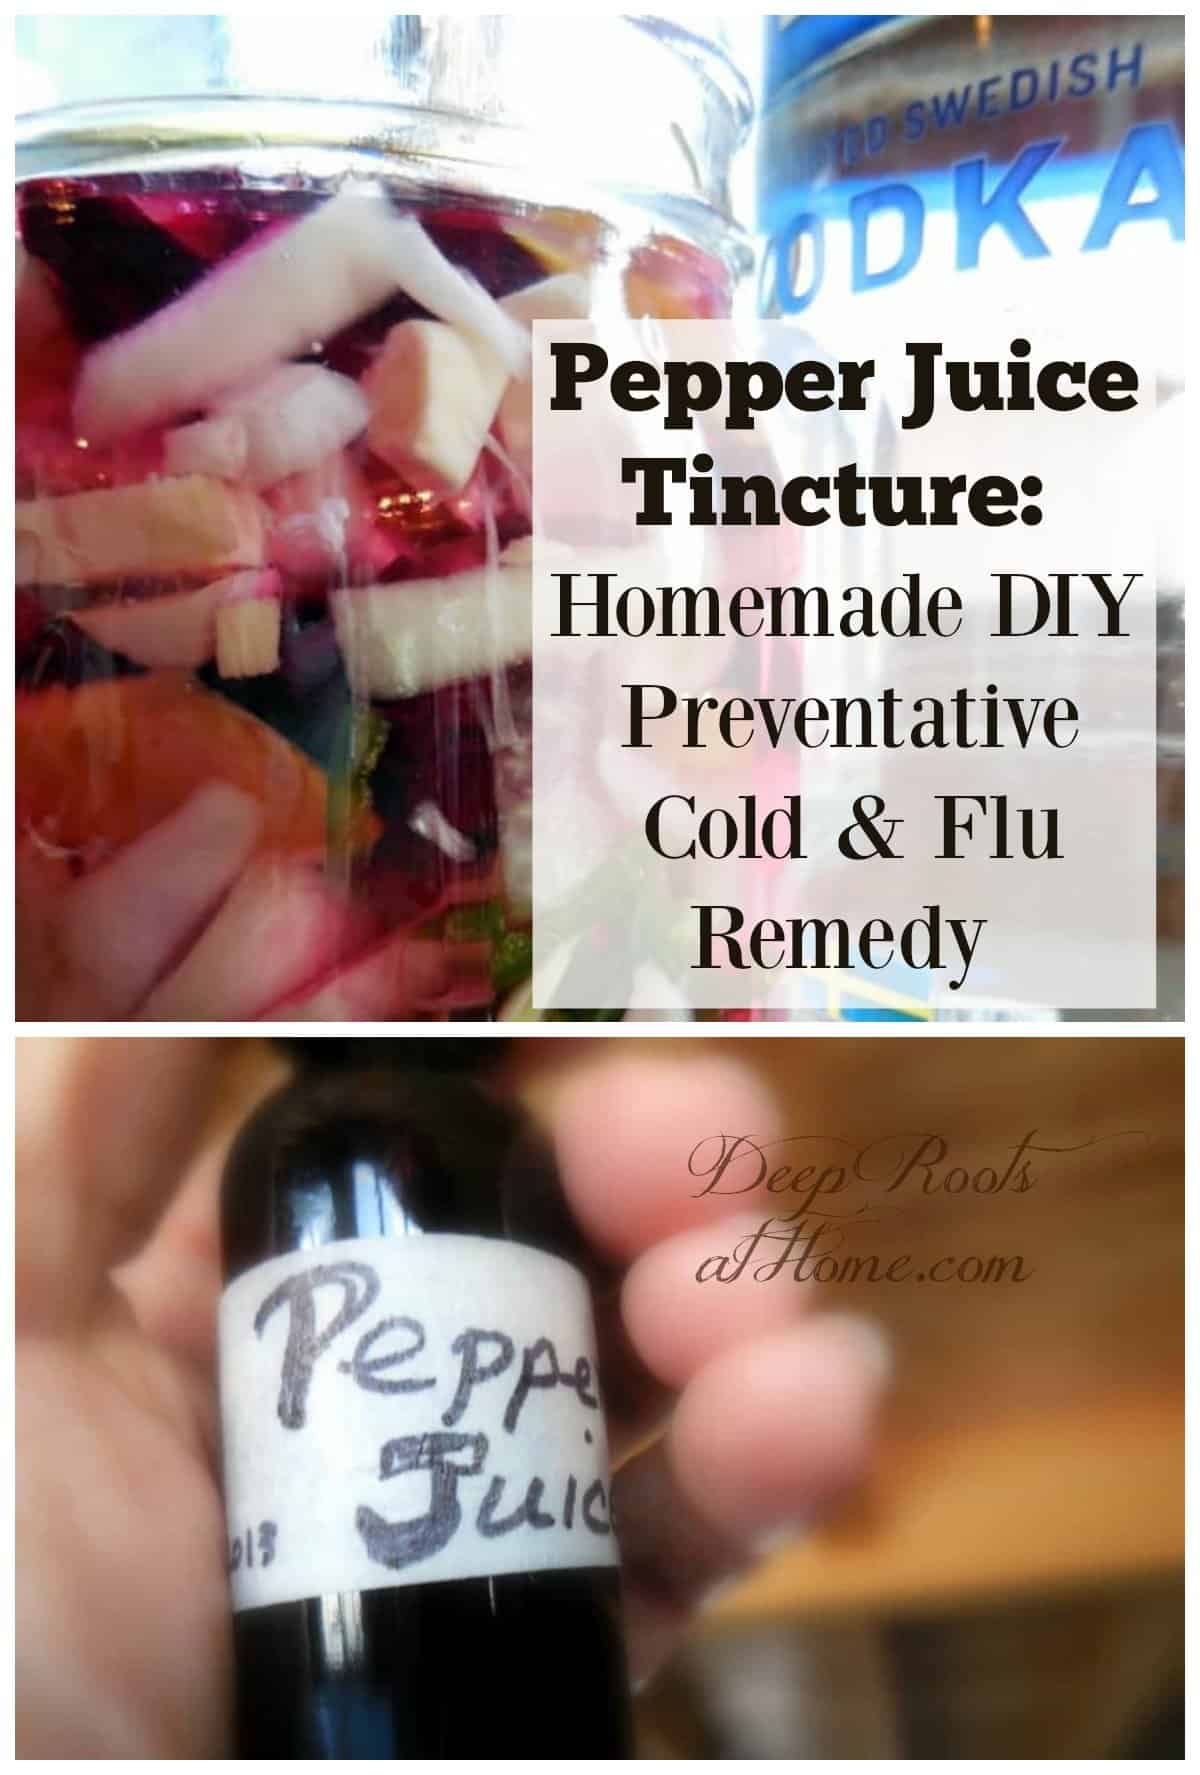 Pepper Juice Tincture: A Homemade Preventative Cold and Flu Remedy. Chopped up horseradish, red beets, ginger, garlic, on